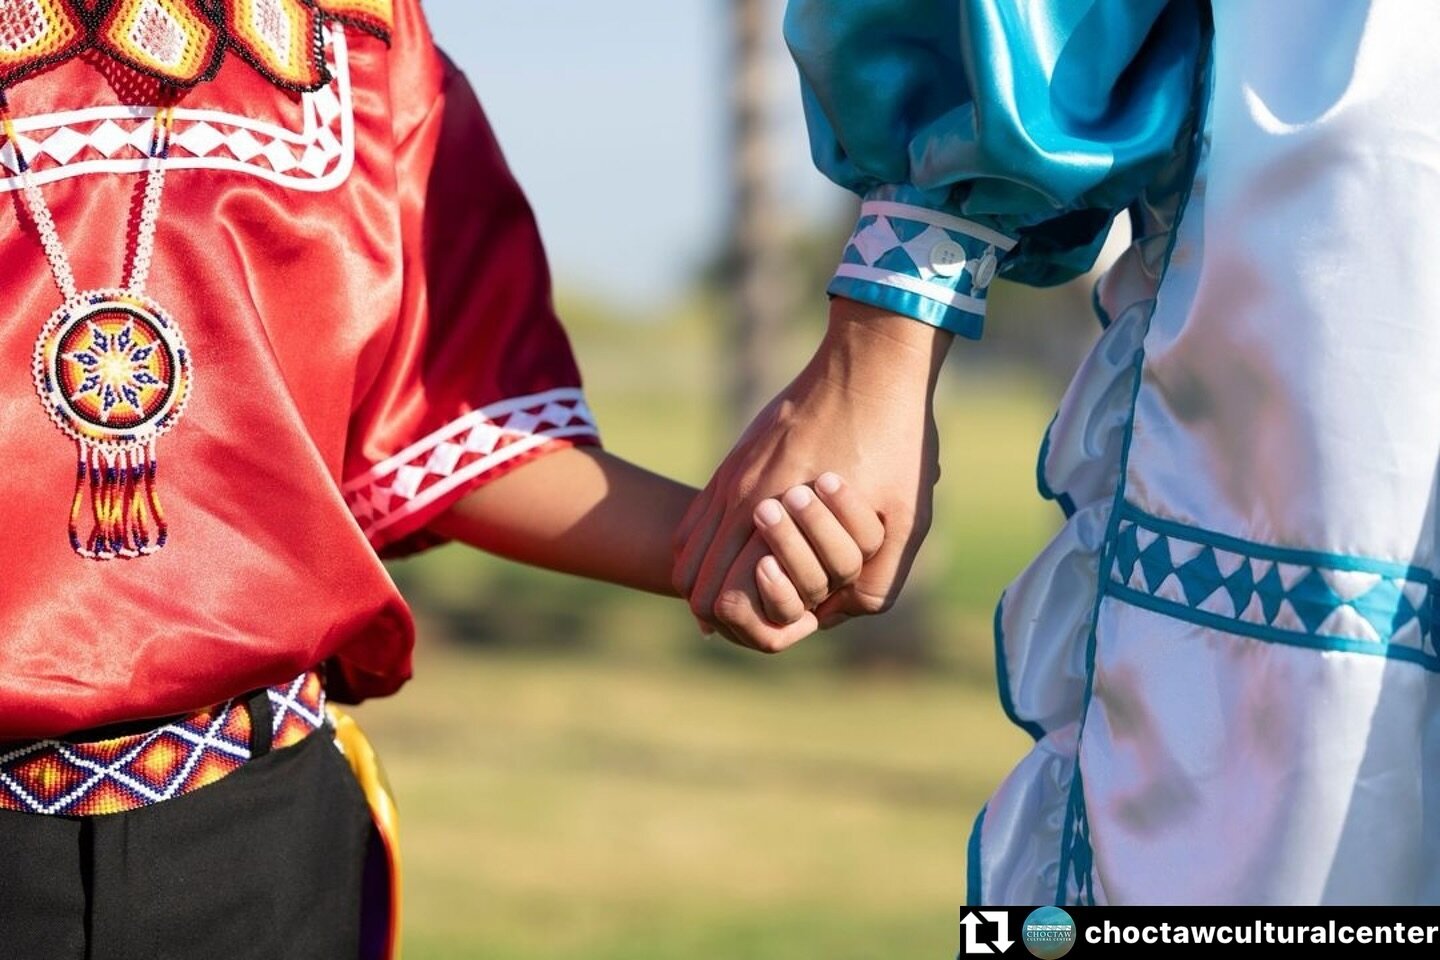 #repost @choctawculturalcenter The Choctaw Cultural Center is dedicated to exploring, preserving, and showcasing the culture and history of the Choctaw people. 

Your generous support will positively impact these efforts. When you give to the Choctaw